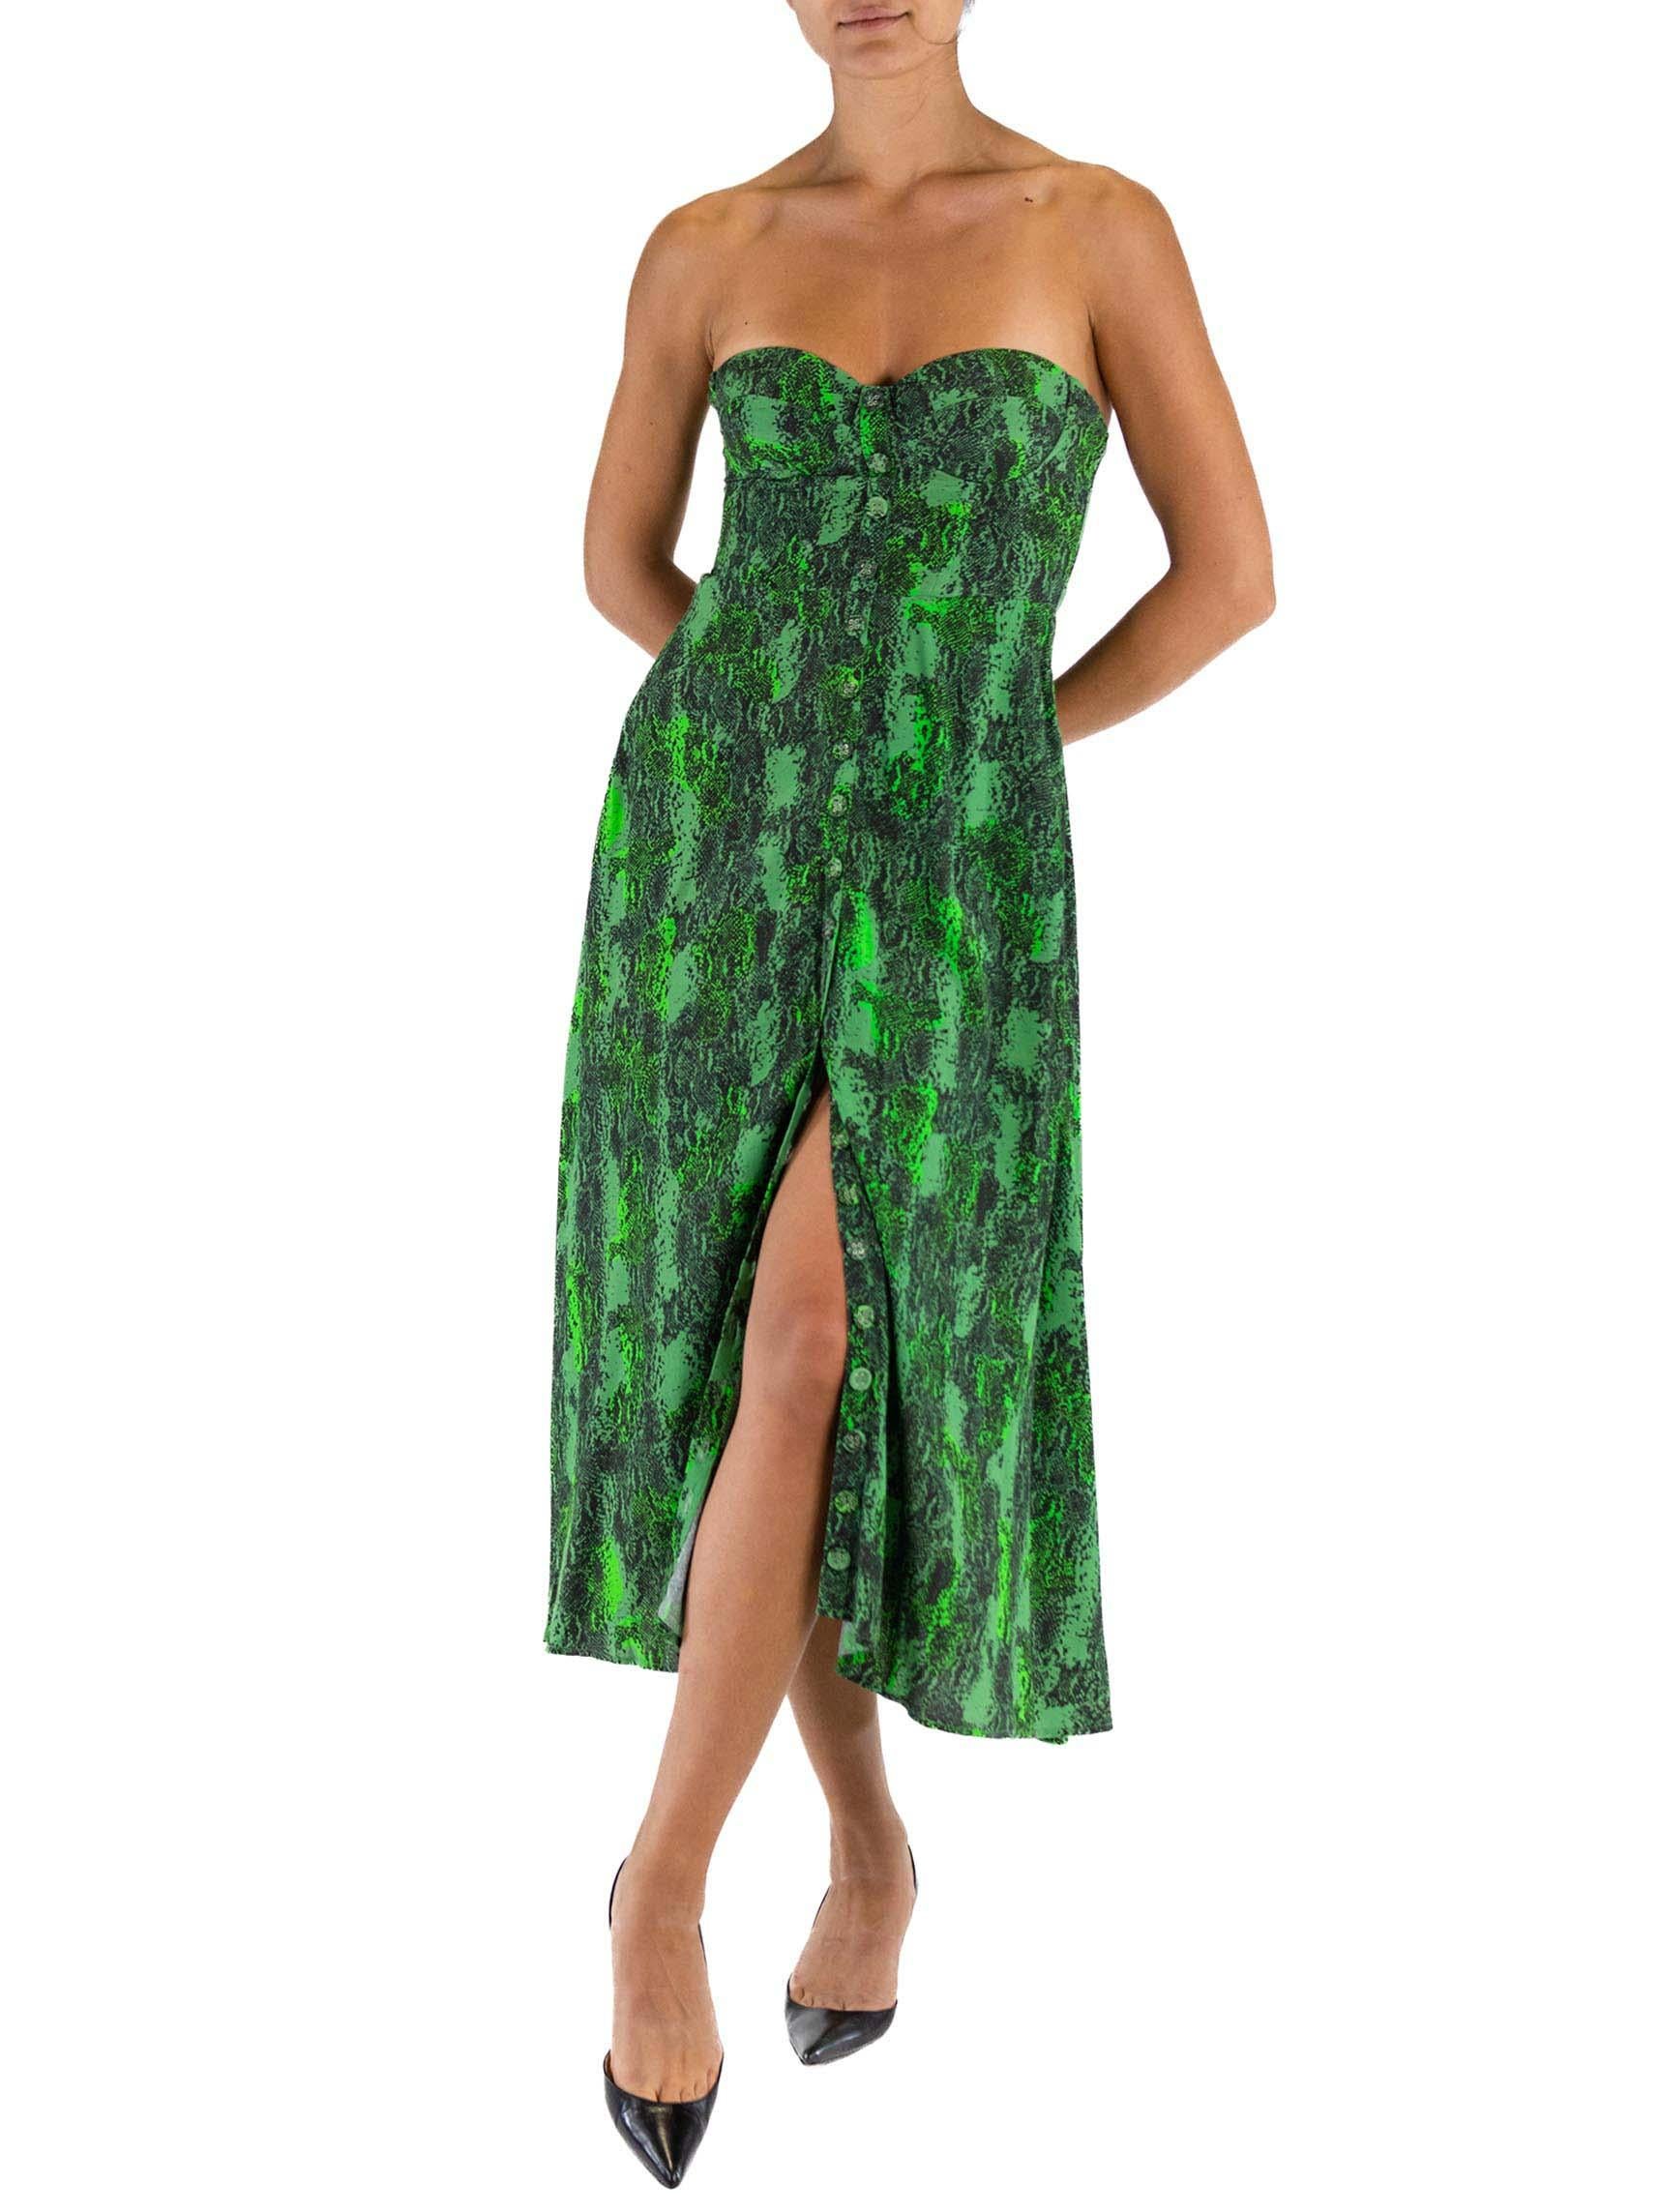 1990S ROTATE Green Rayon  Snake Print Strapless Bustier Dress With Pockets In Excellent Condition For Sale In New York, NY